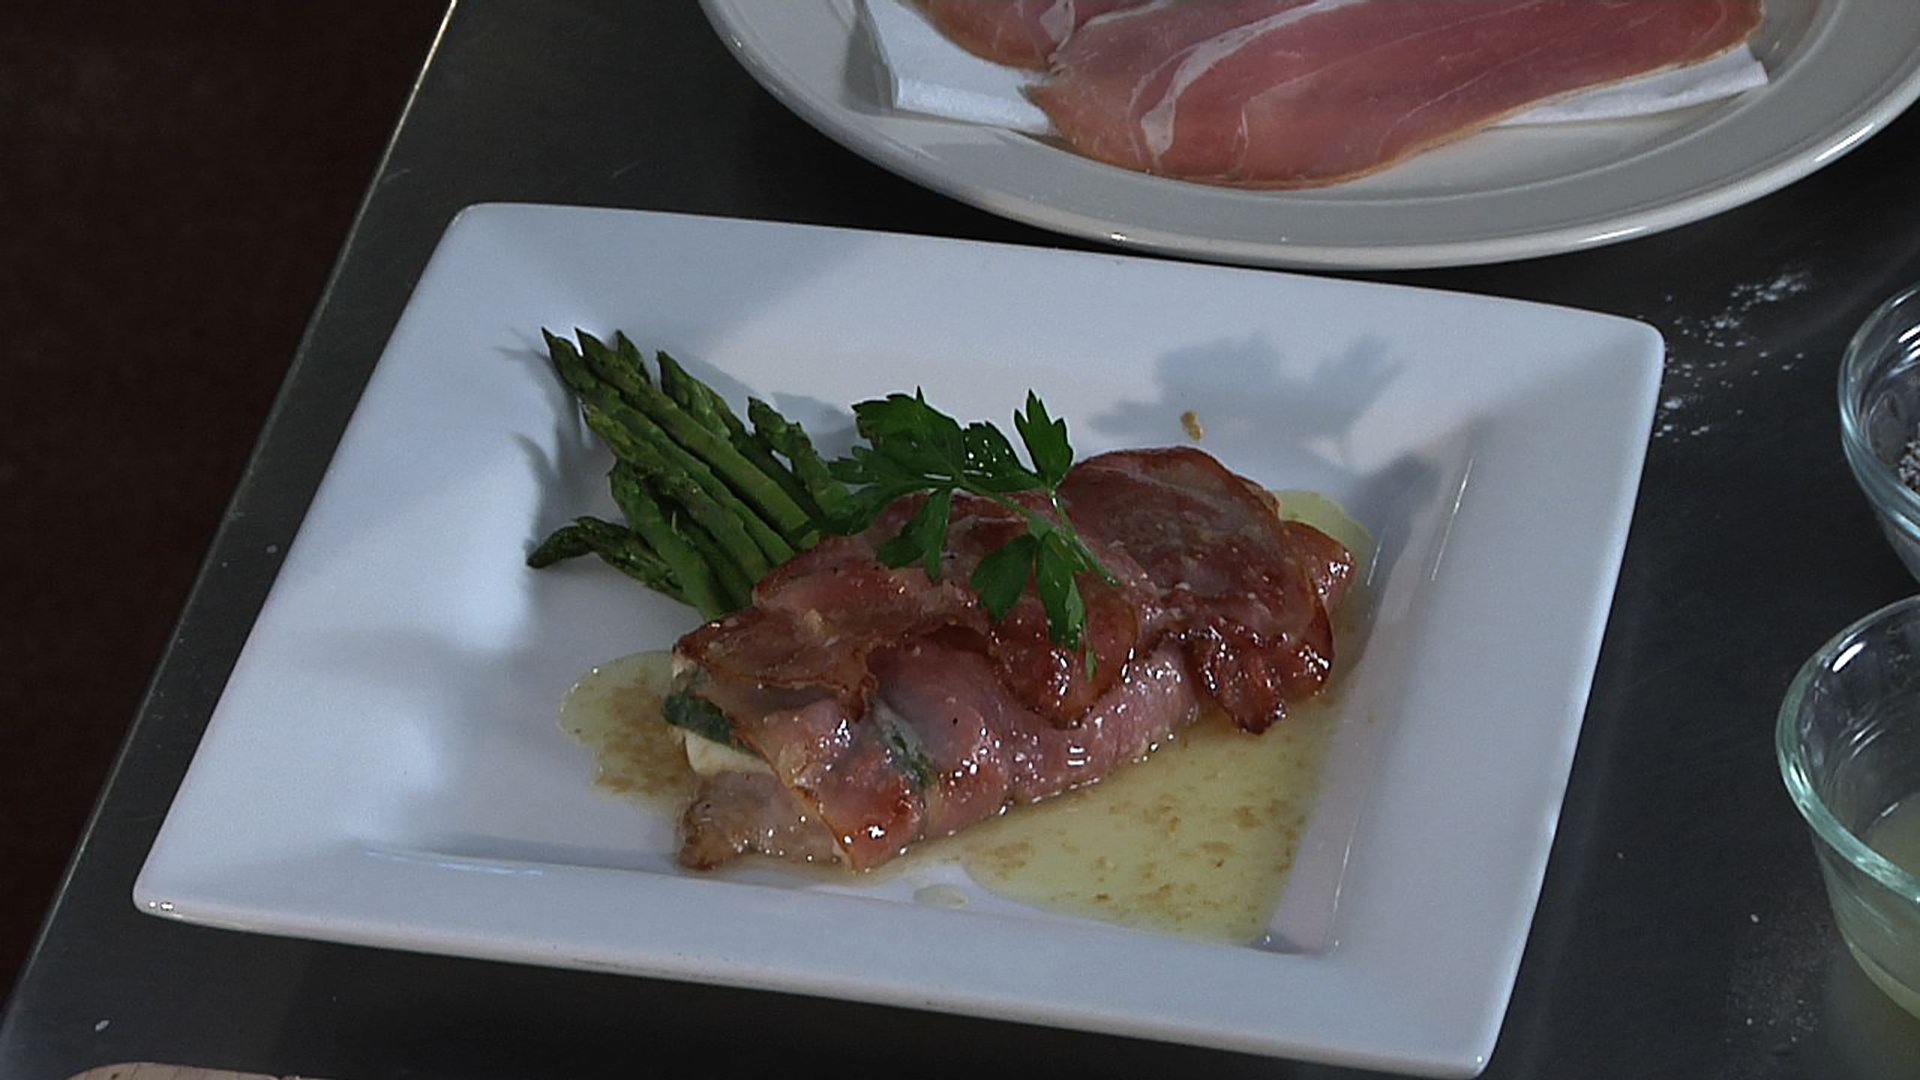 The Tasty Table: May - Veal Saltimbocca